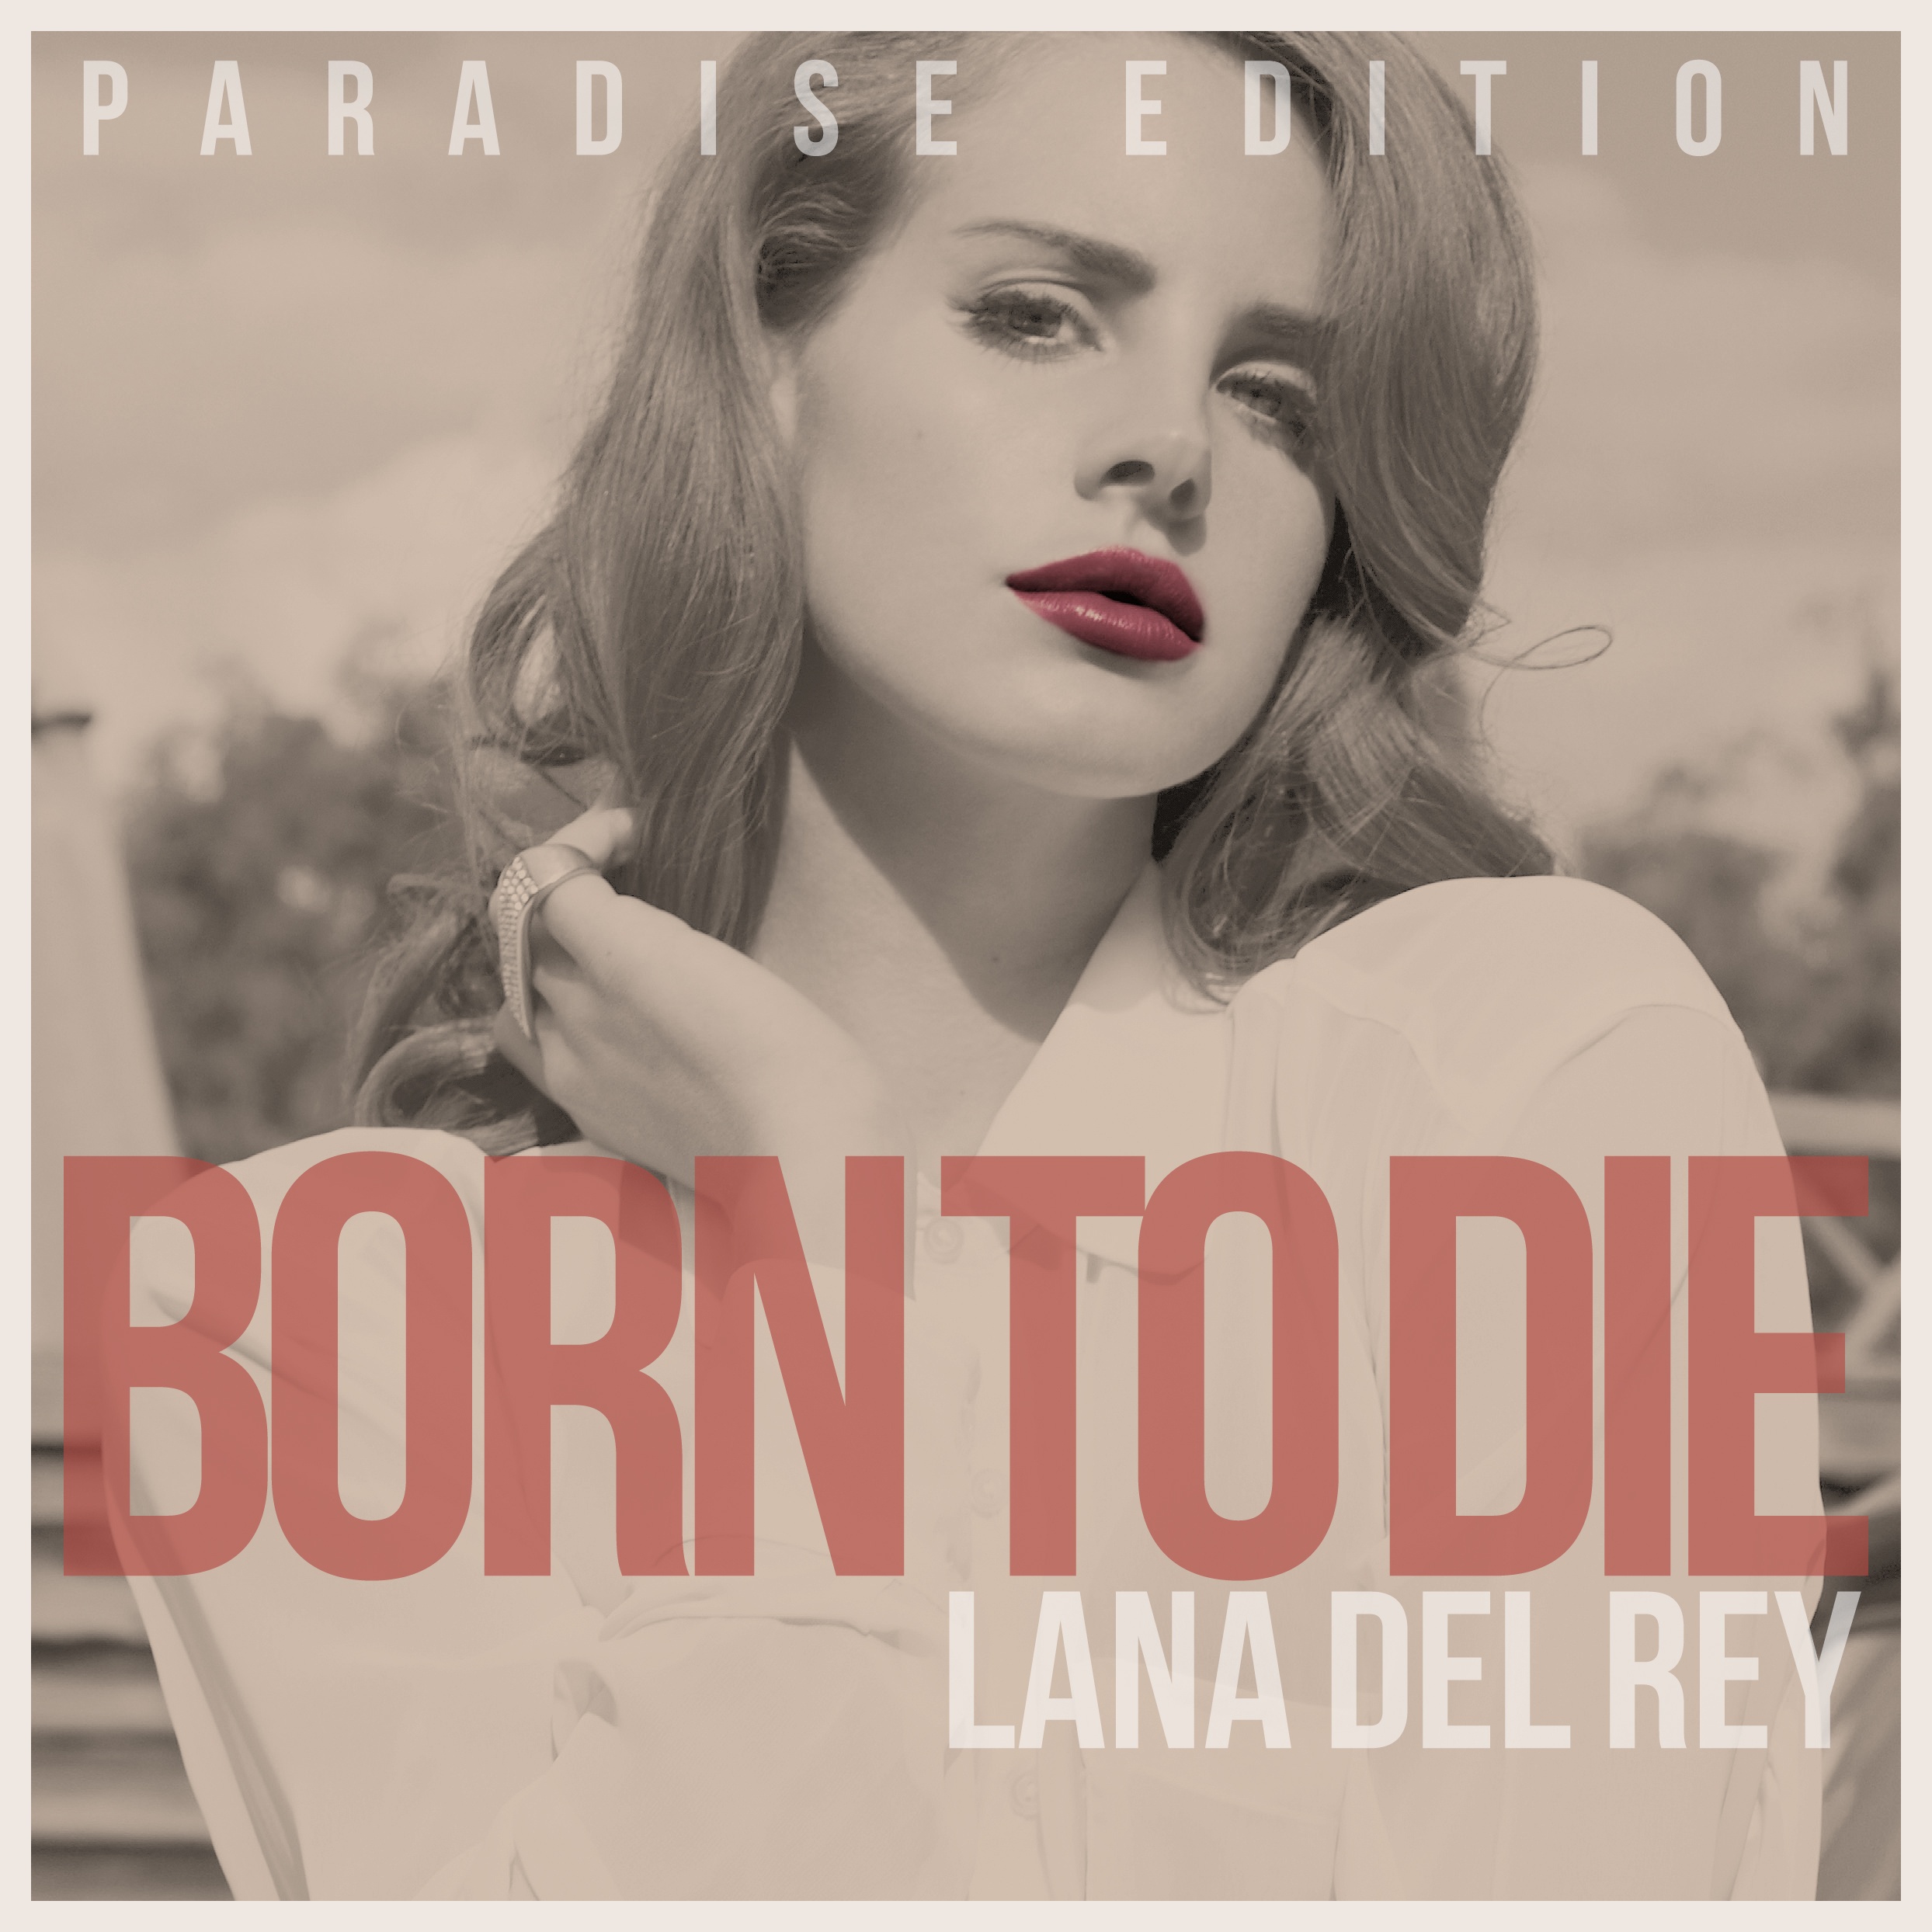 Lana Del Rey: Born To Die, Paradise Edition box cover